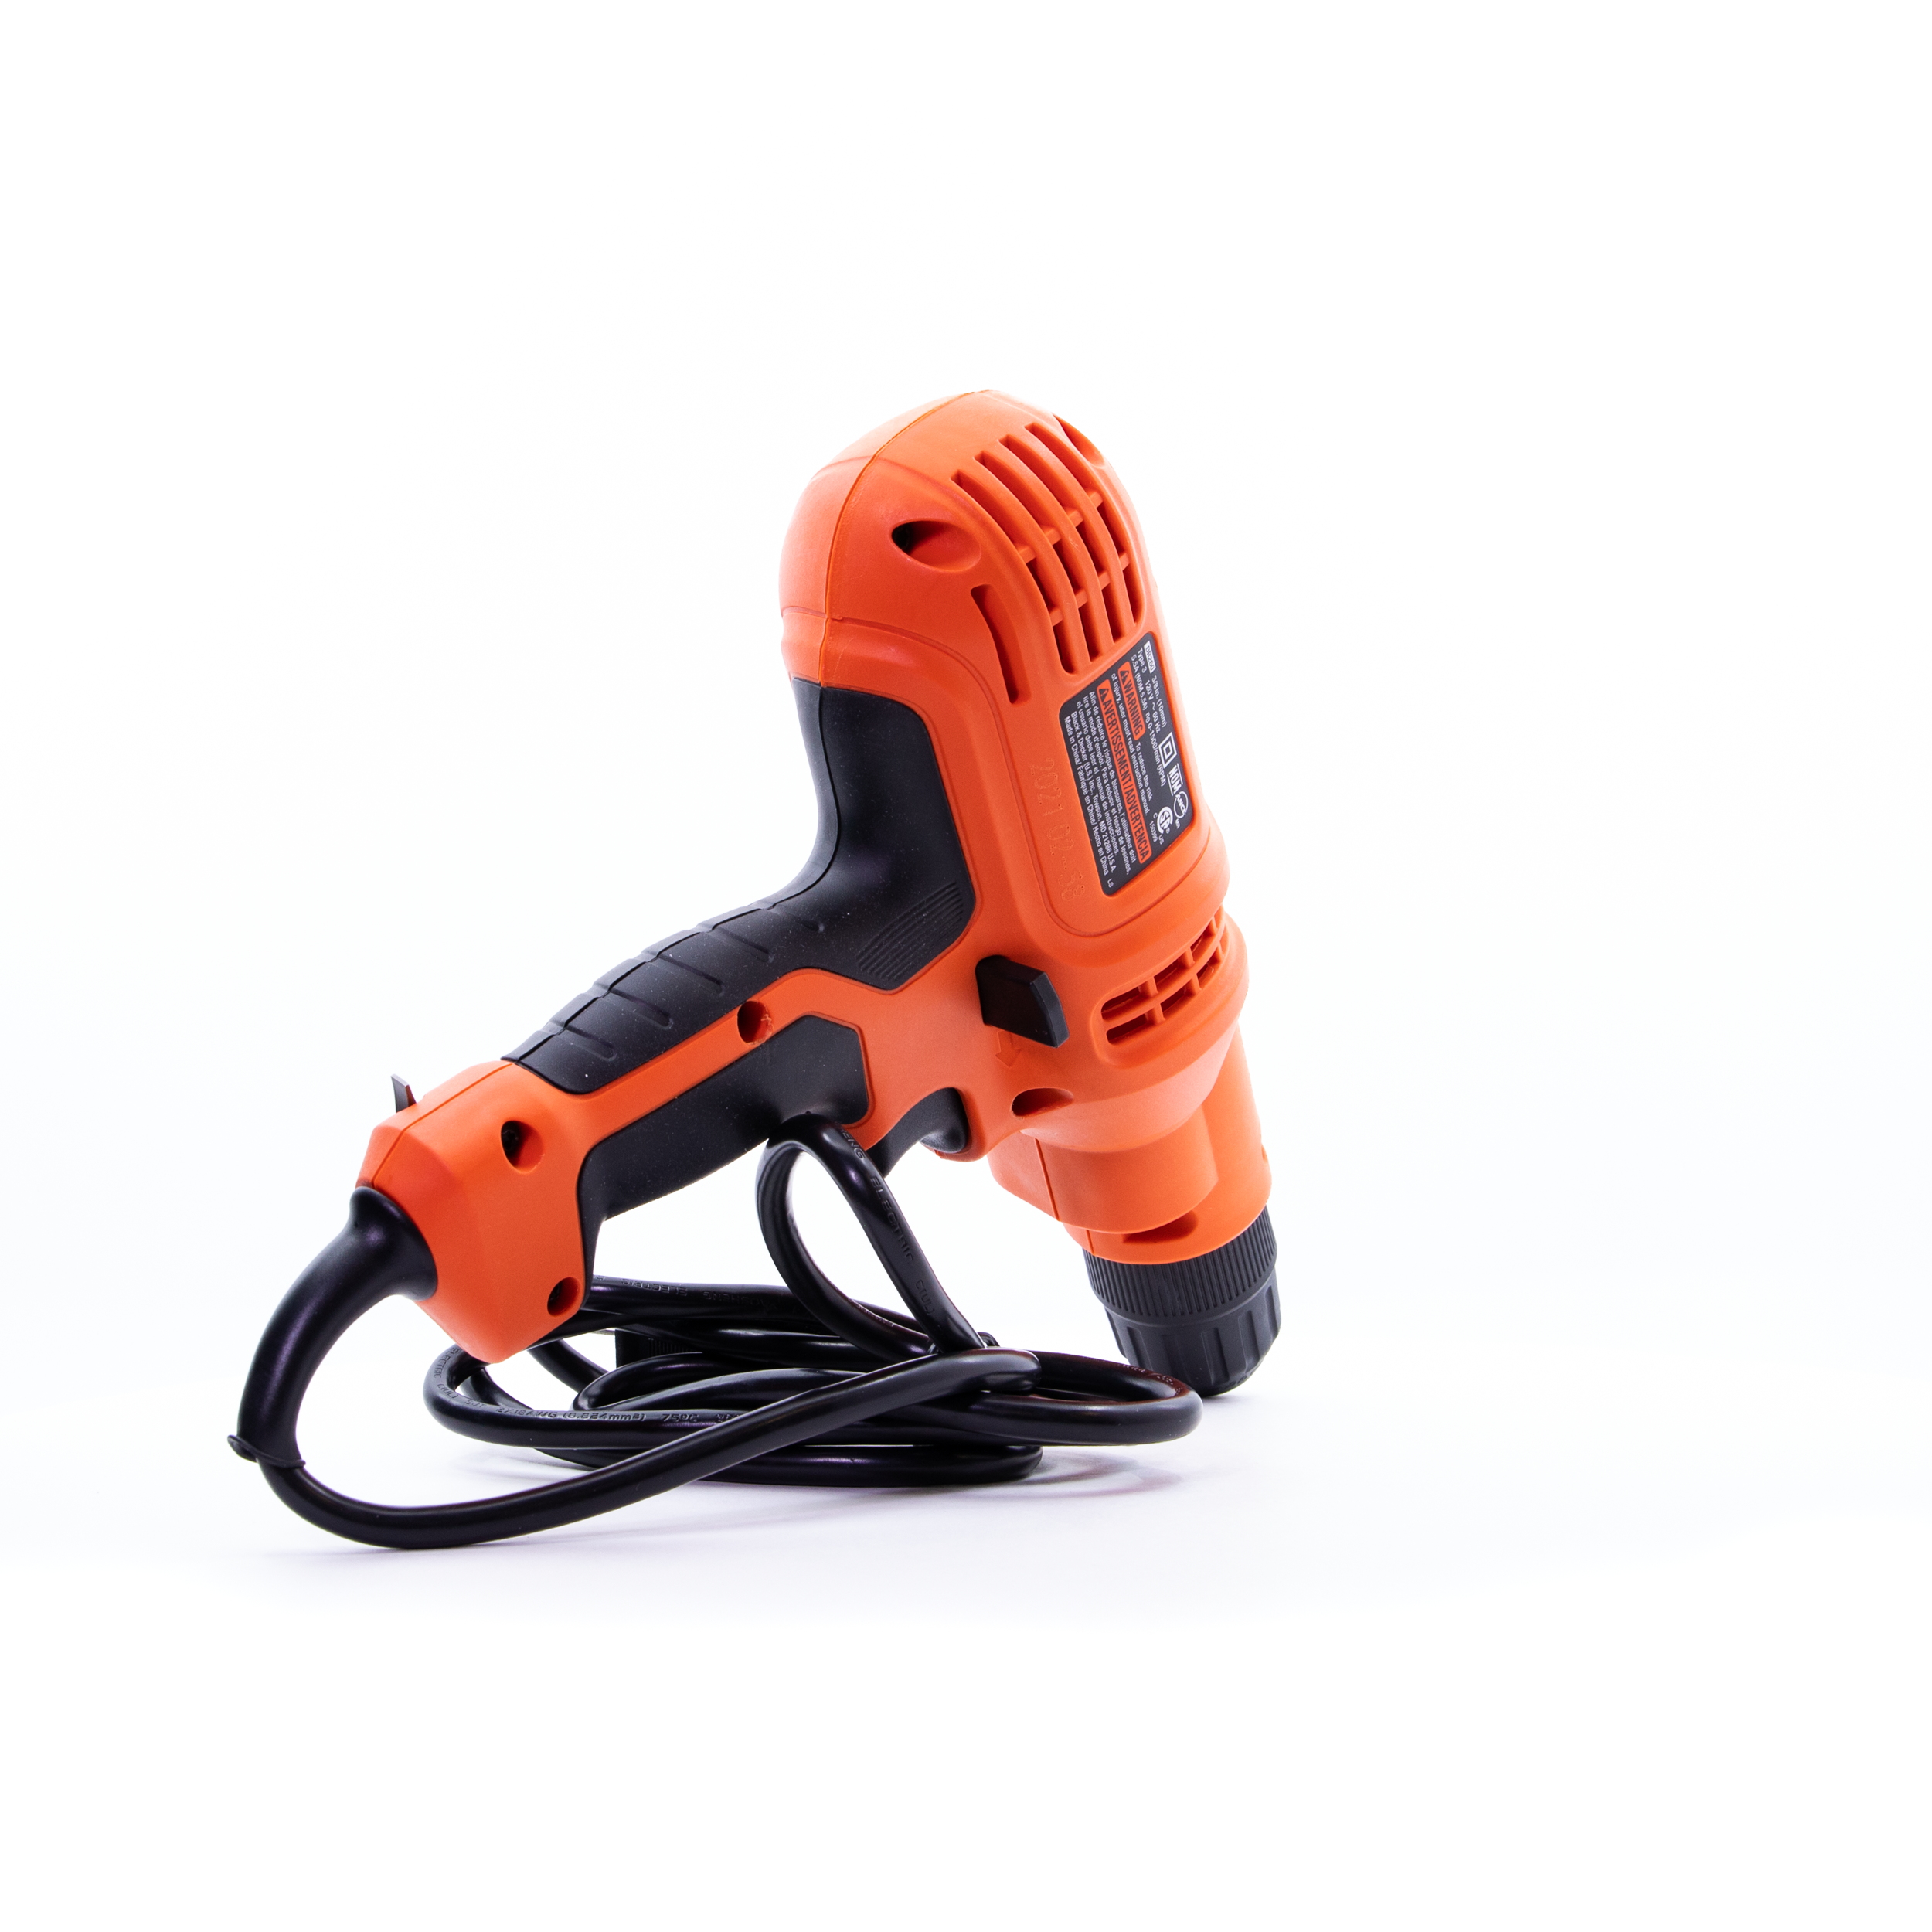 BEACH PAWN - Black and decker corded drill 4.5 amp 3/8